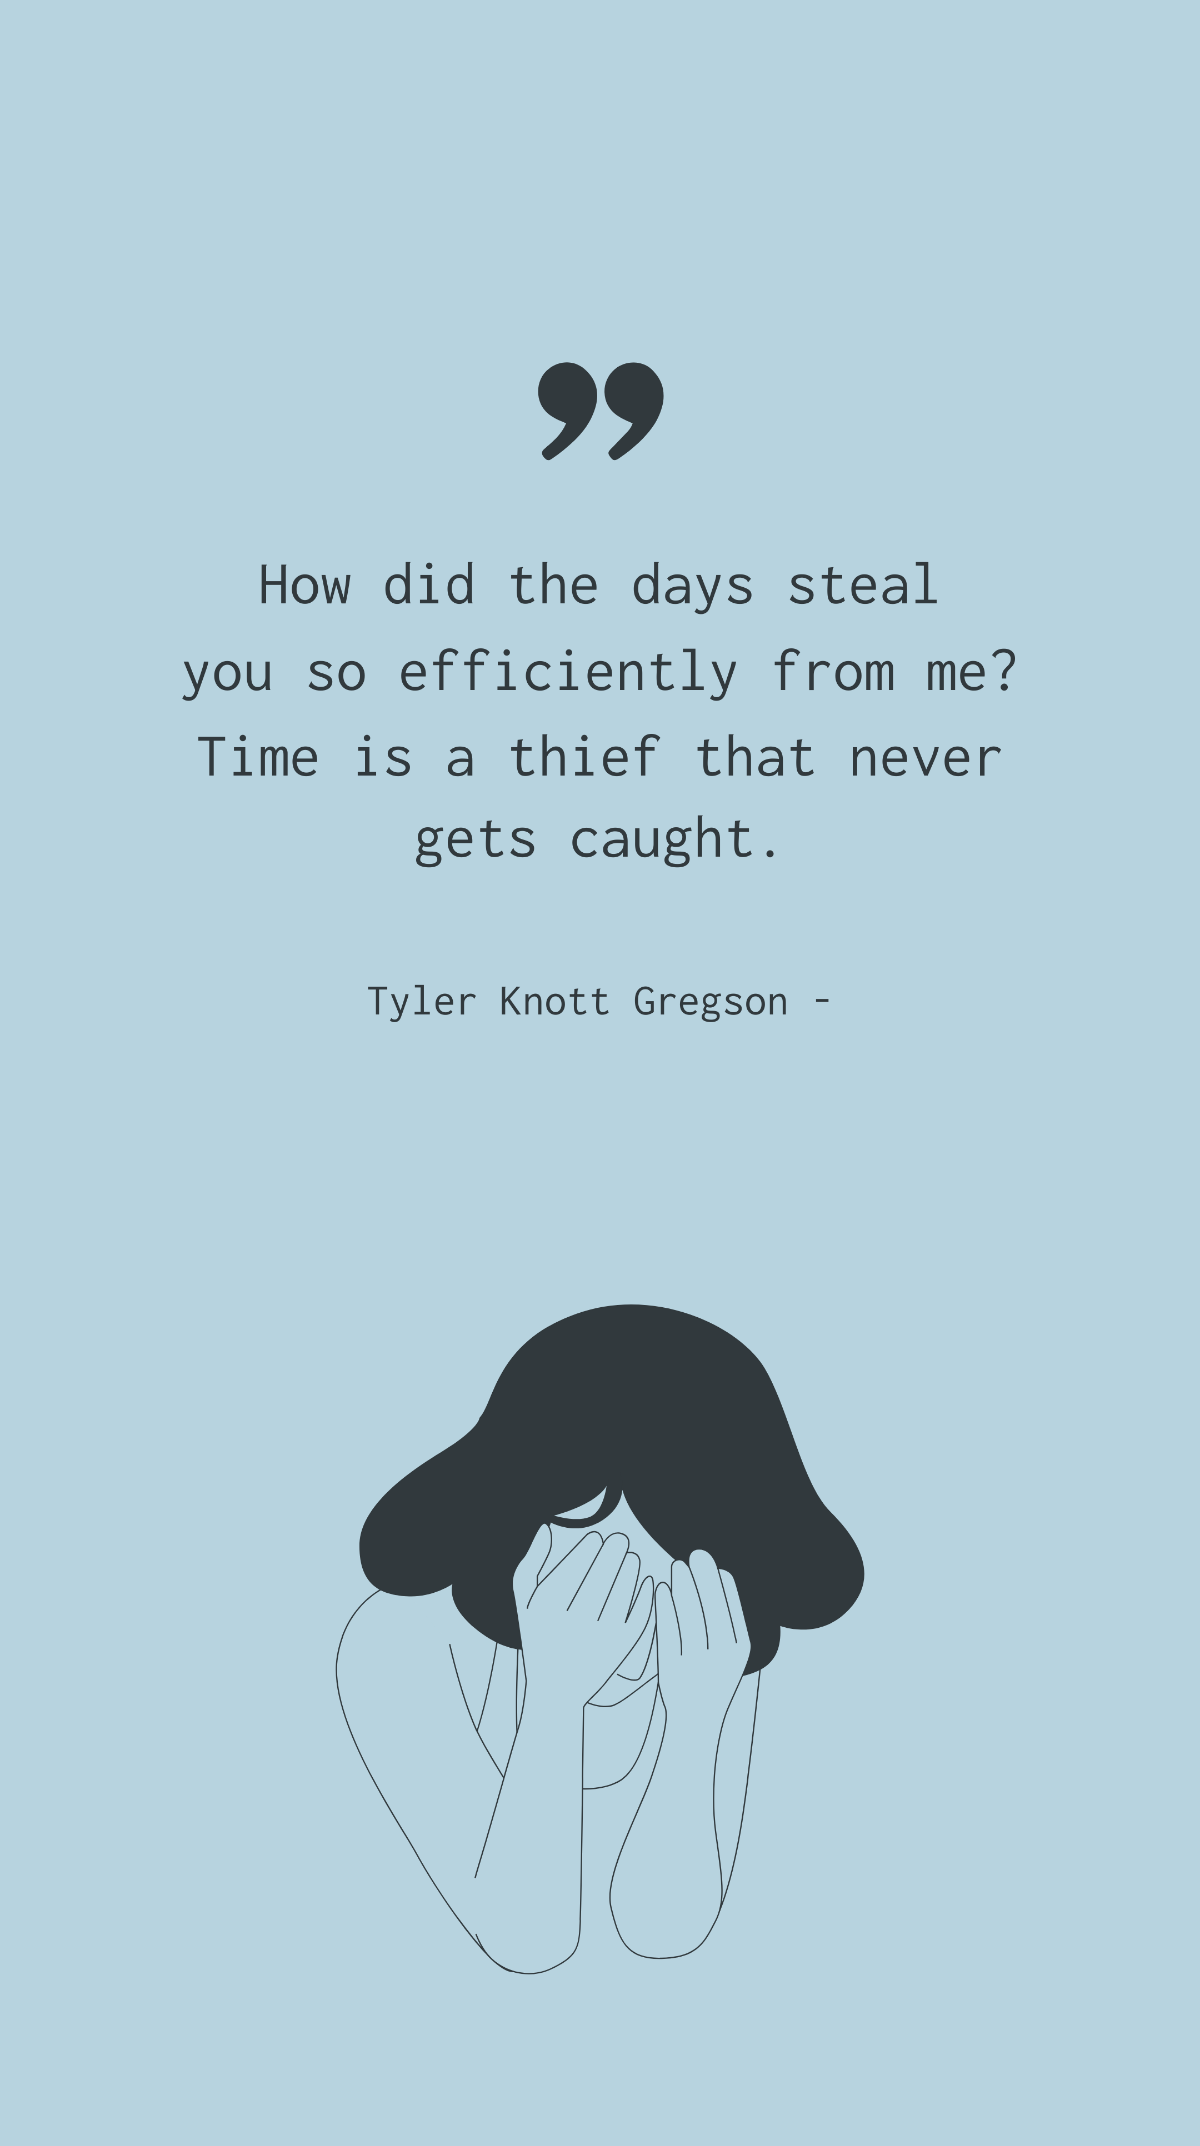 Tyler Knott Gregson - How did the days steal you so efficiently from me? Time is a thief that never gets caught.